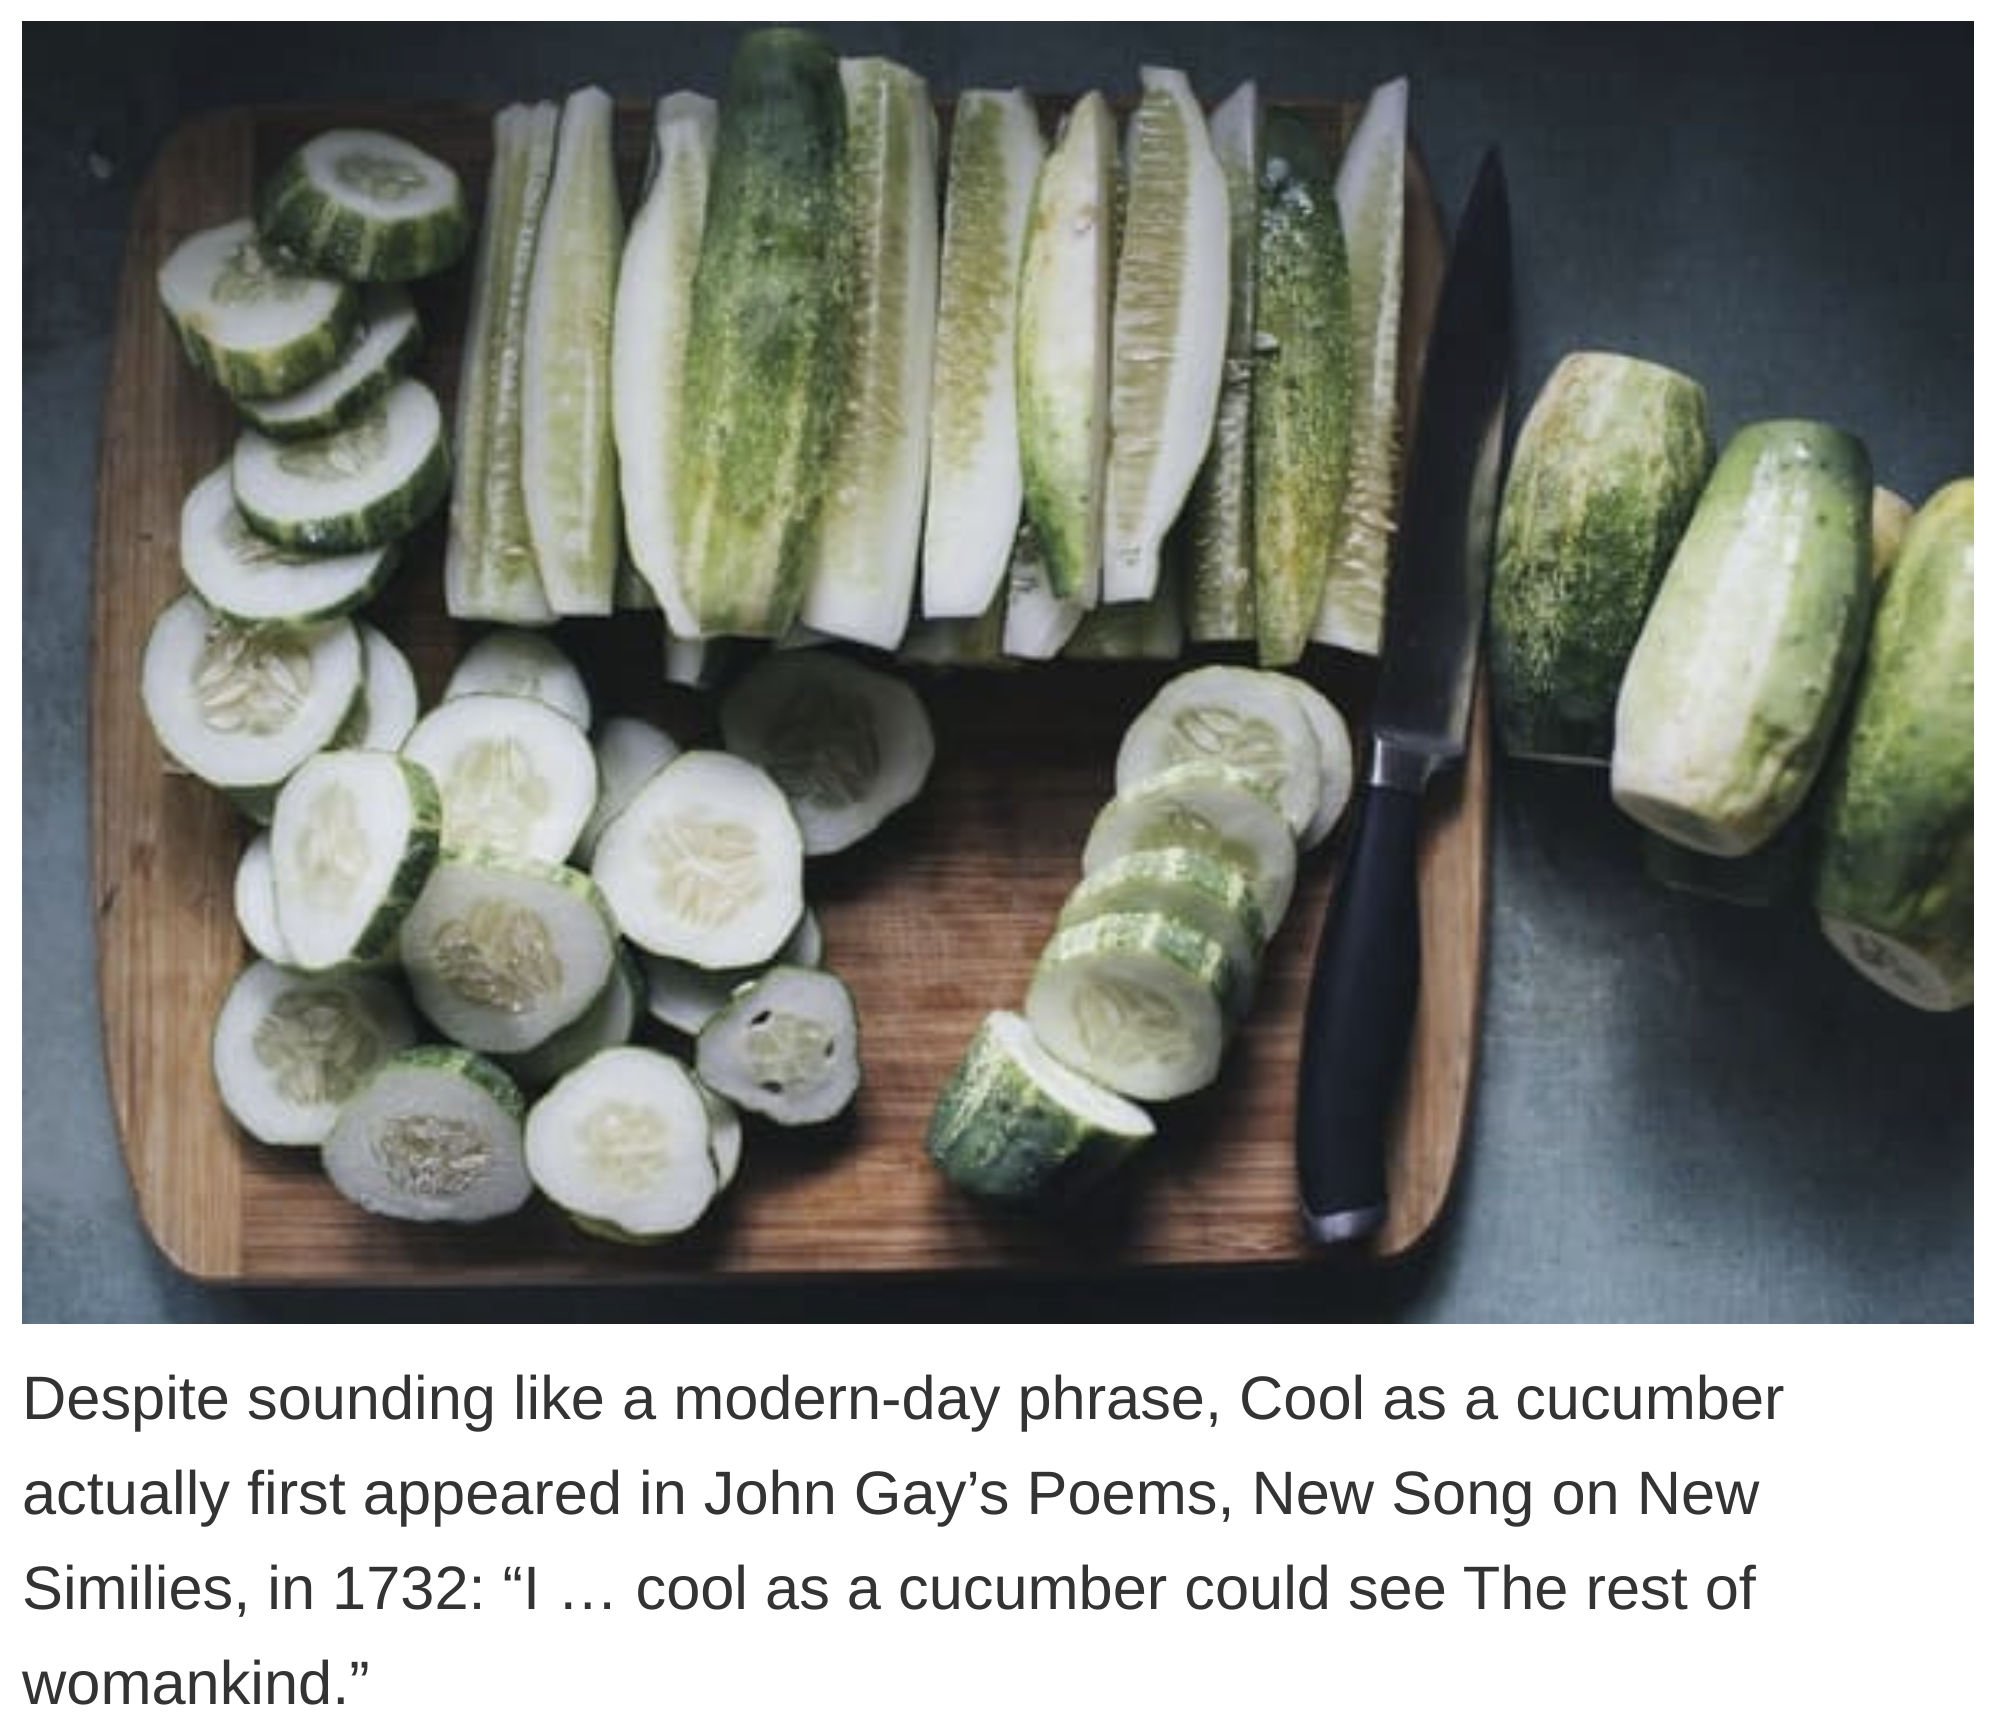 etymology english language - Despite sounding a modernday phrase, Cool as a cucumber actually first appeared in John Gay's Poems, New Song on New Similies, in 1732